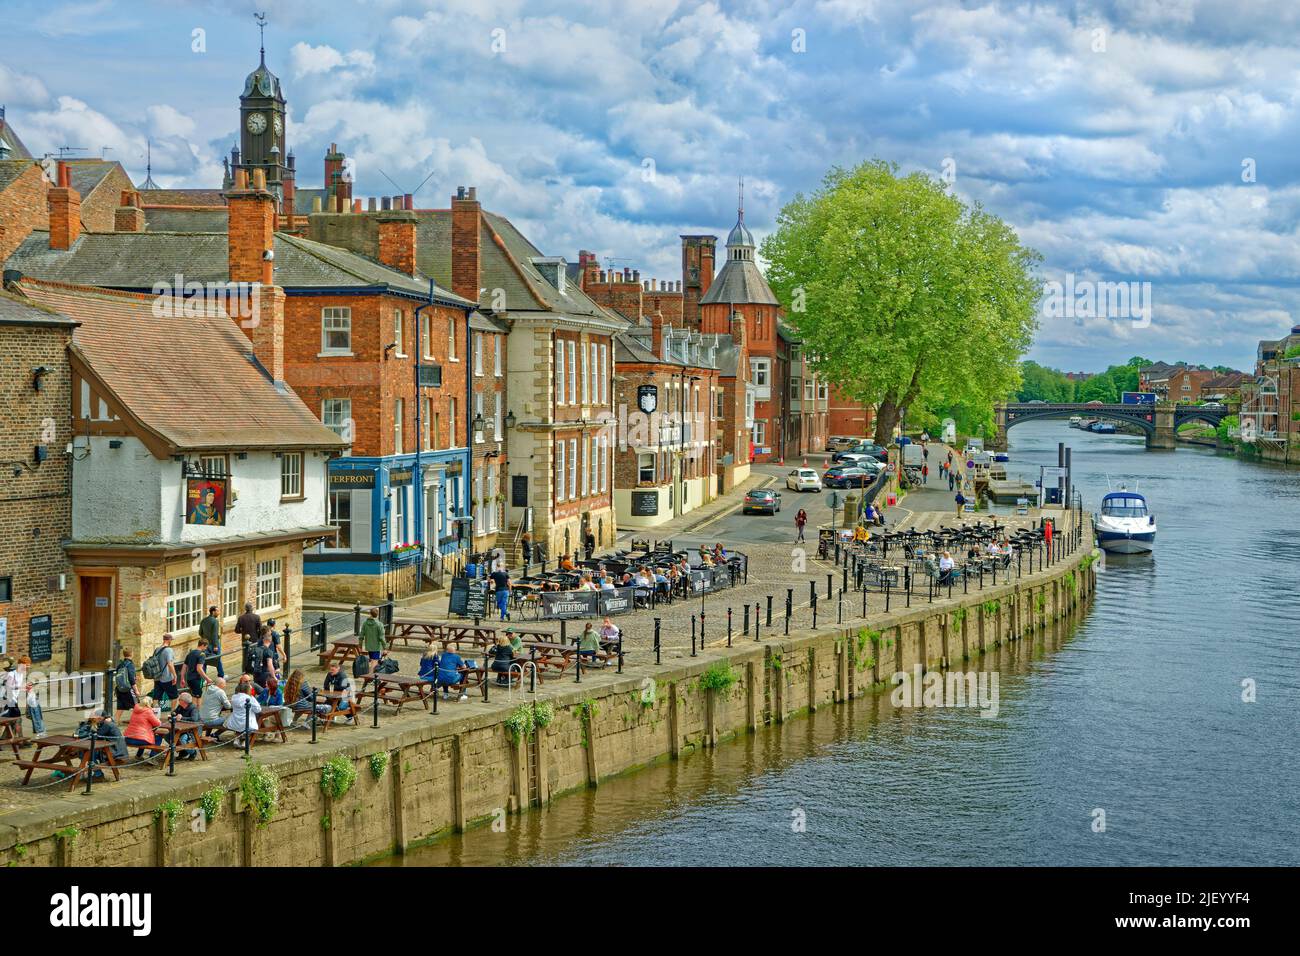 The River Ouse at York, Yorkshire, England. Stock Photo